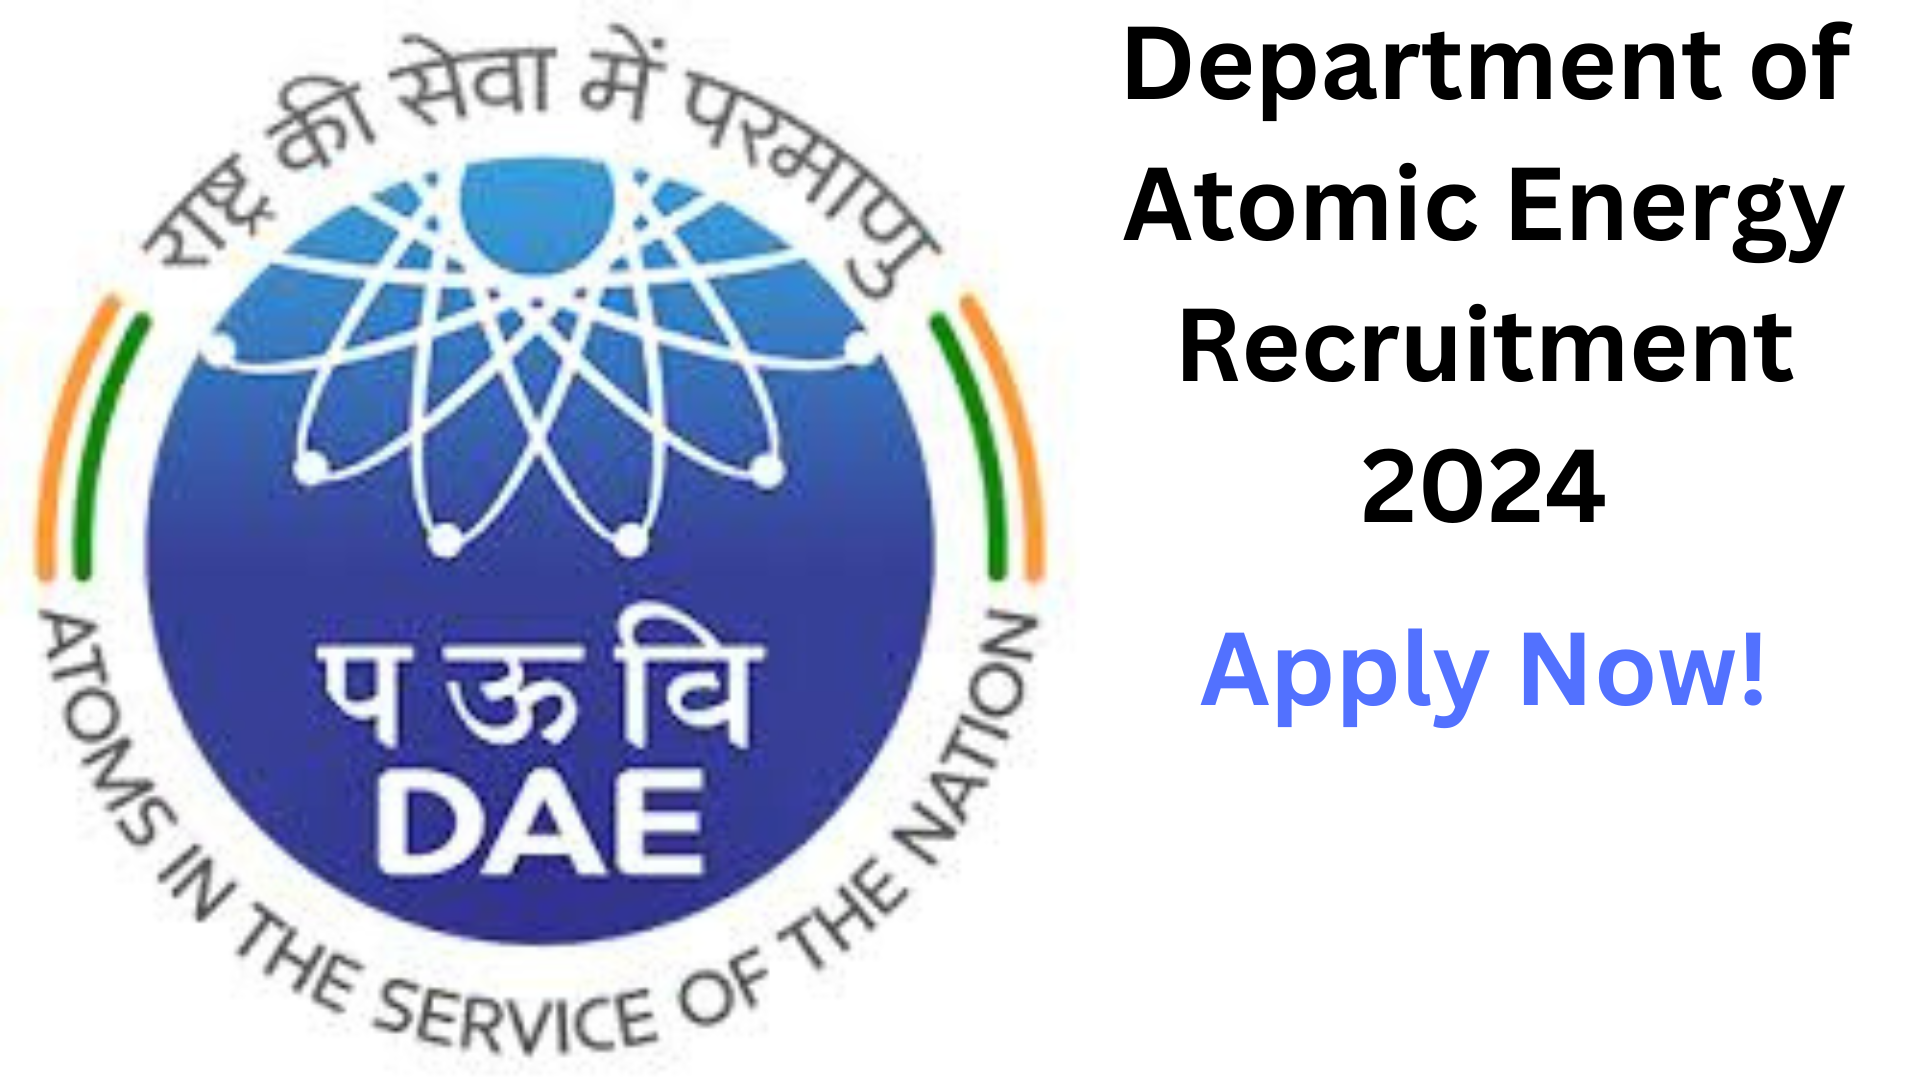 Department of Atomic Energy Recruitment 2024, Apply Now, Check Latest Vacancy, Details, Eligibility Criteria